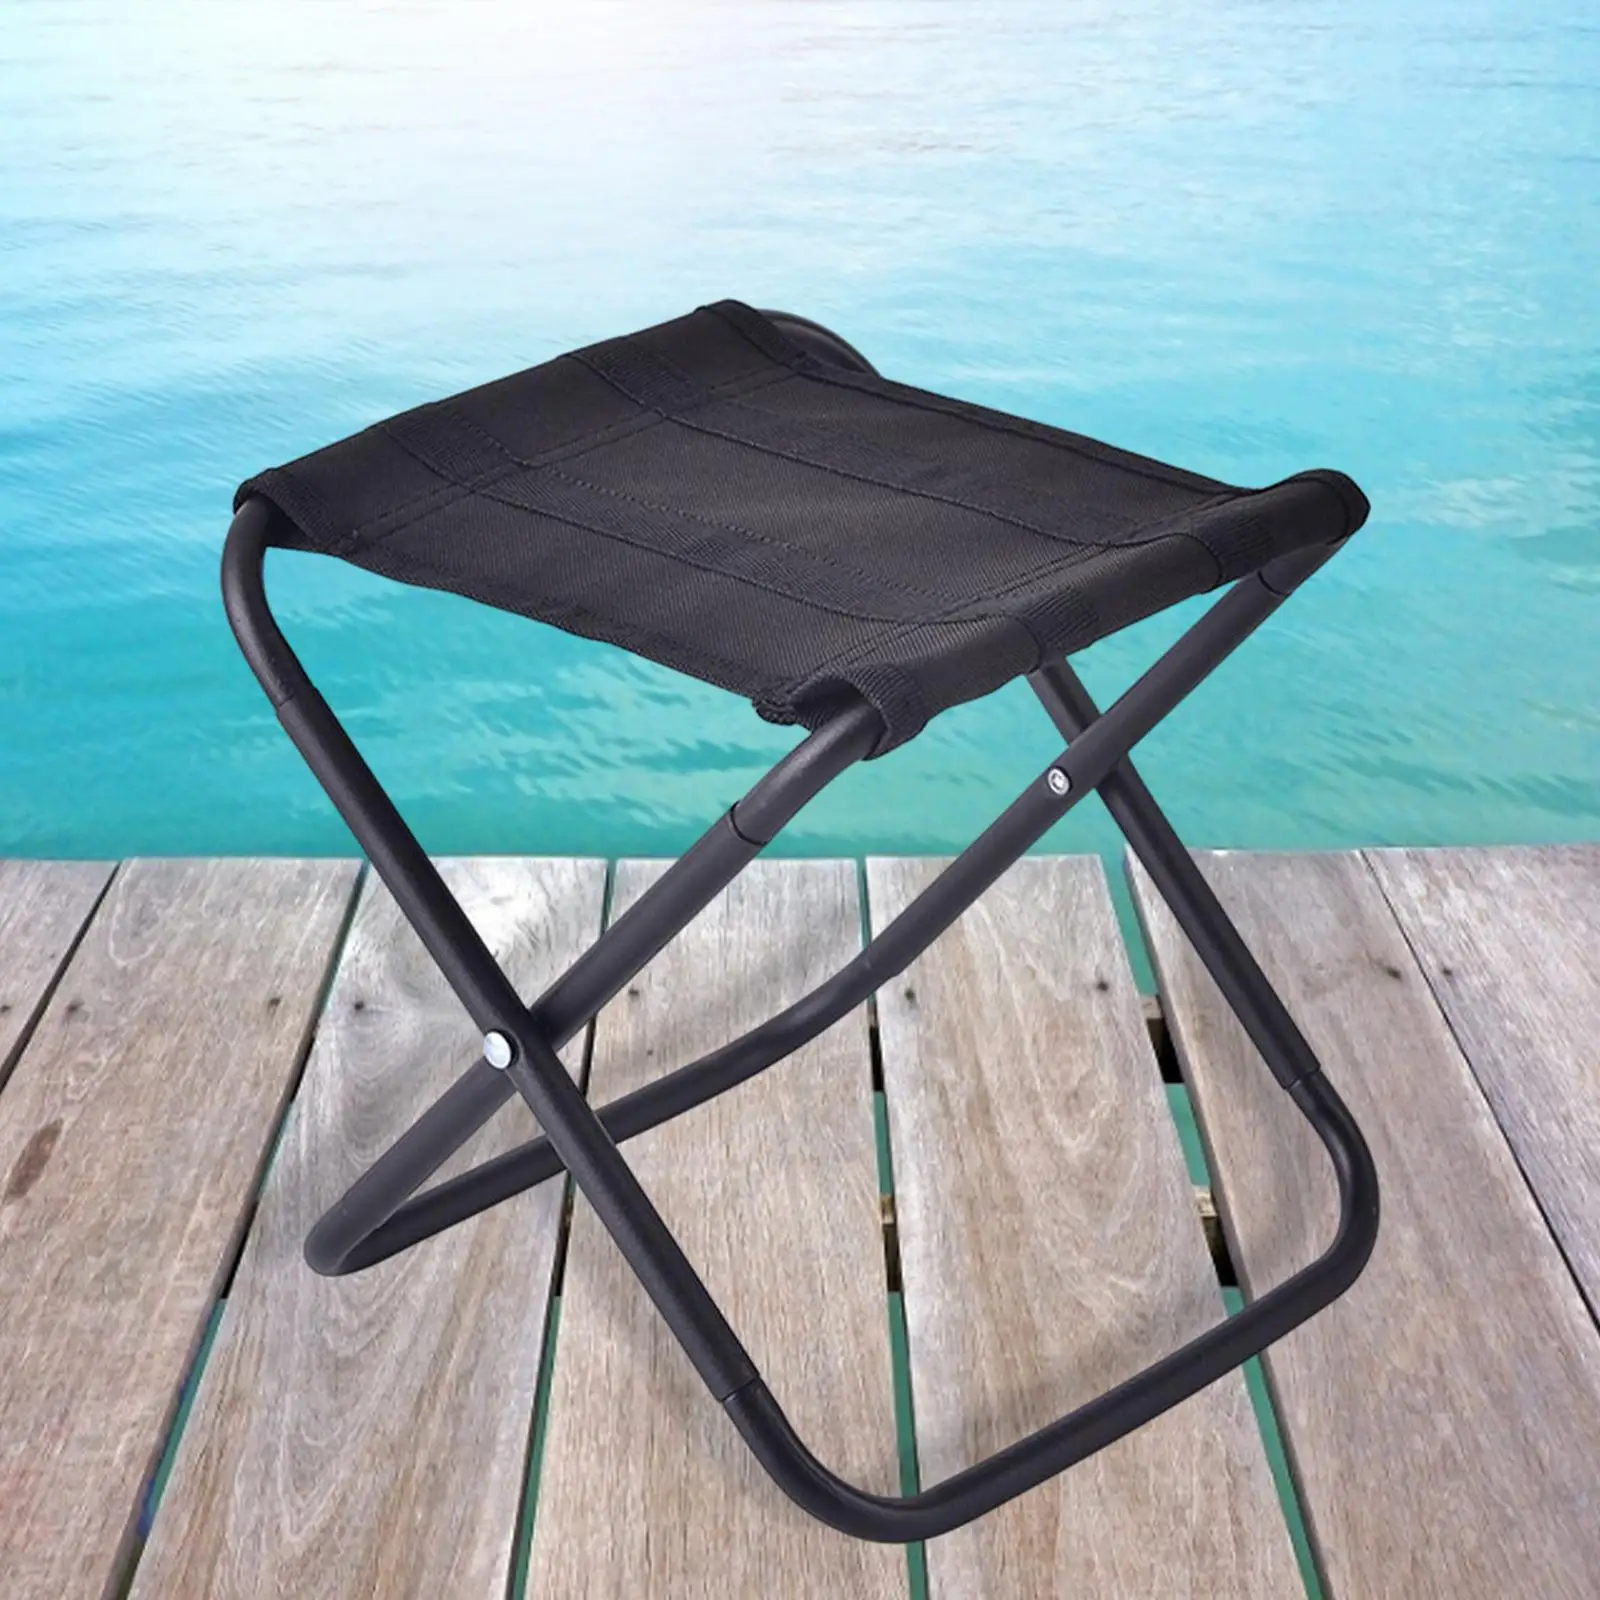 Adult Camping Stool Outdoor chair Ottoman Ultralight Foot Stool Seat for Lounge Walking Hiking Picnic Backpacking Traveling